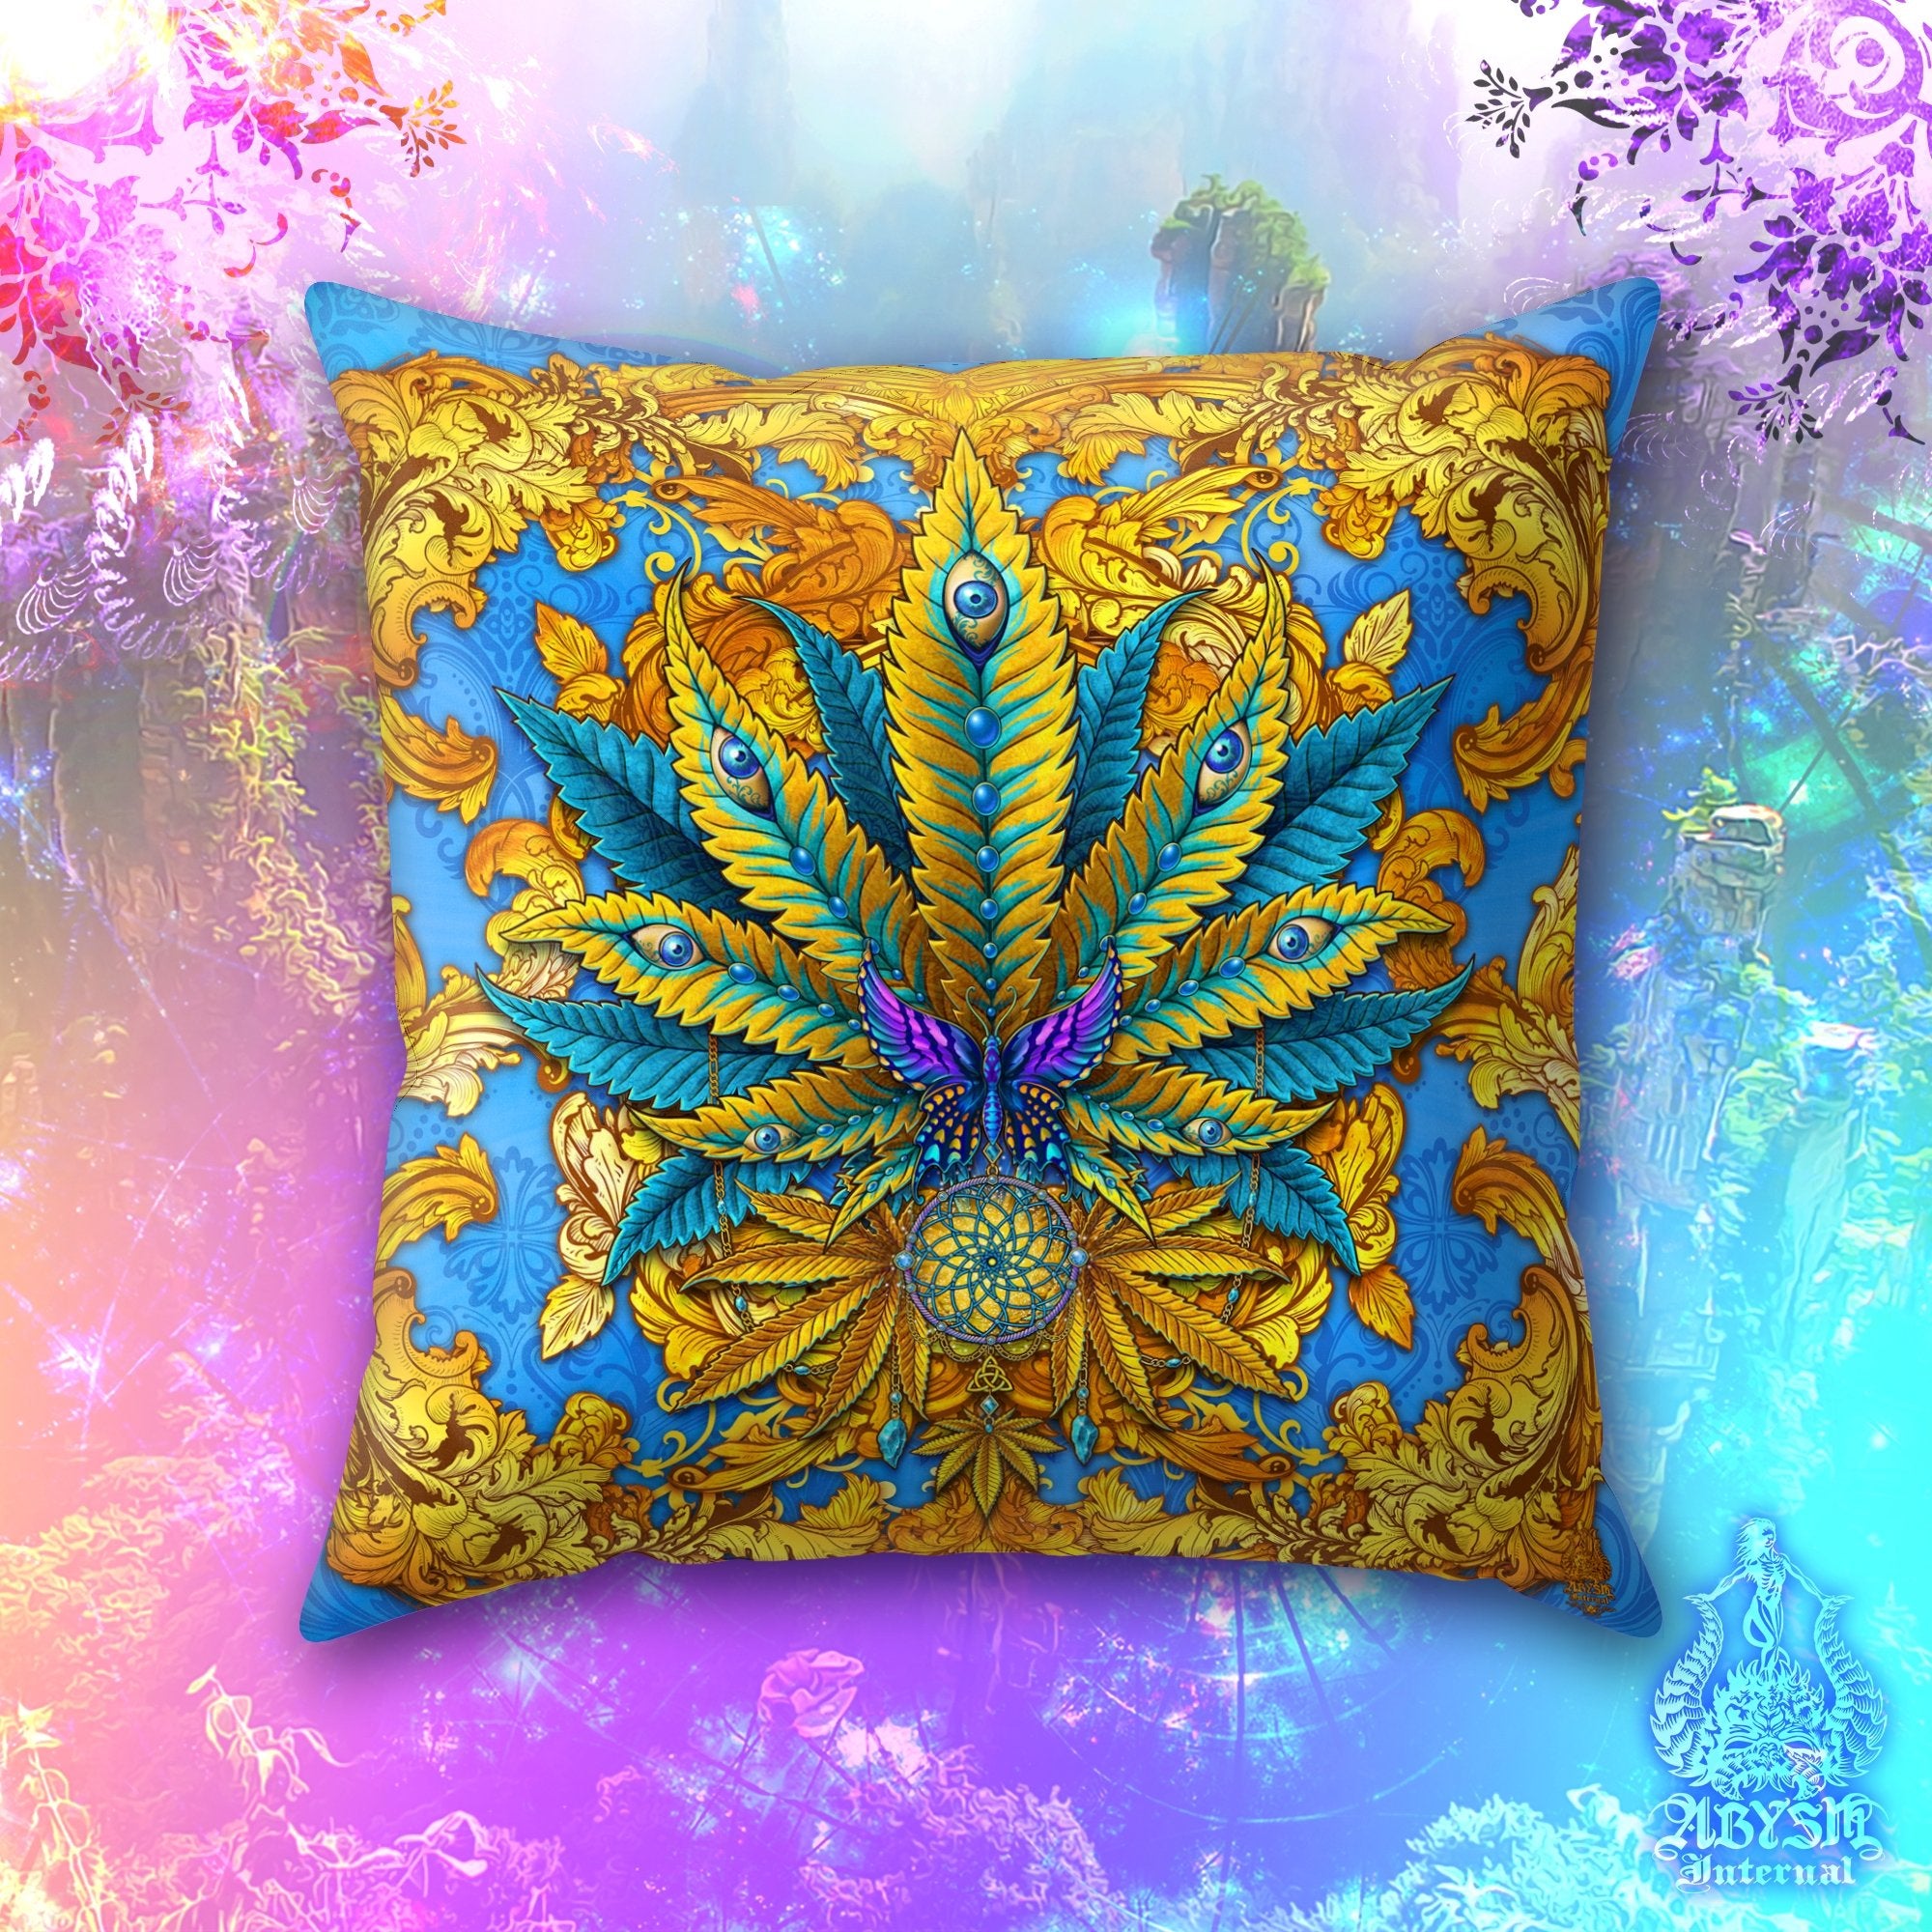 Weed Throw Pillow, Cannabis Shop Decor, Indie Decorative Accent Cushion, Hippie Room Decor, 420 Art Print - Cyan and Gold - Abysm Internal